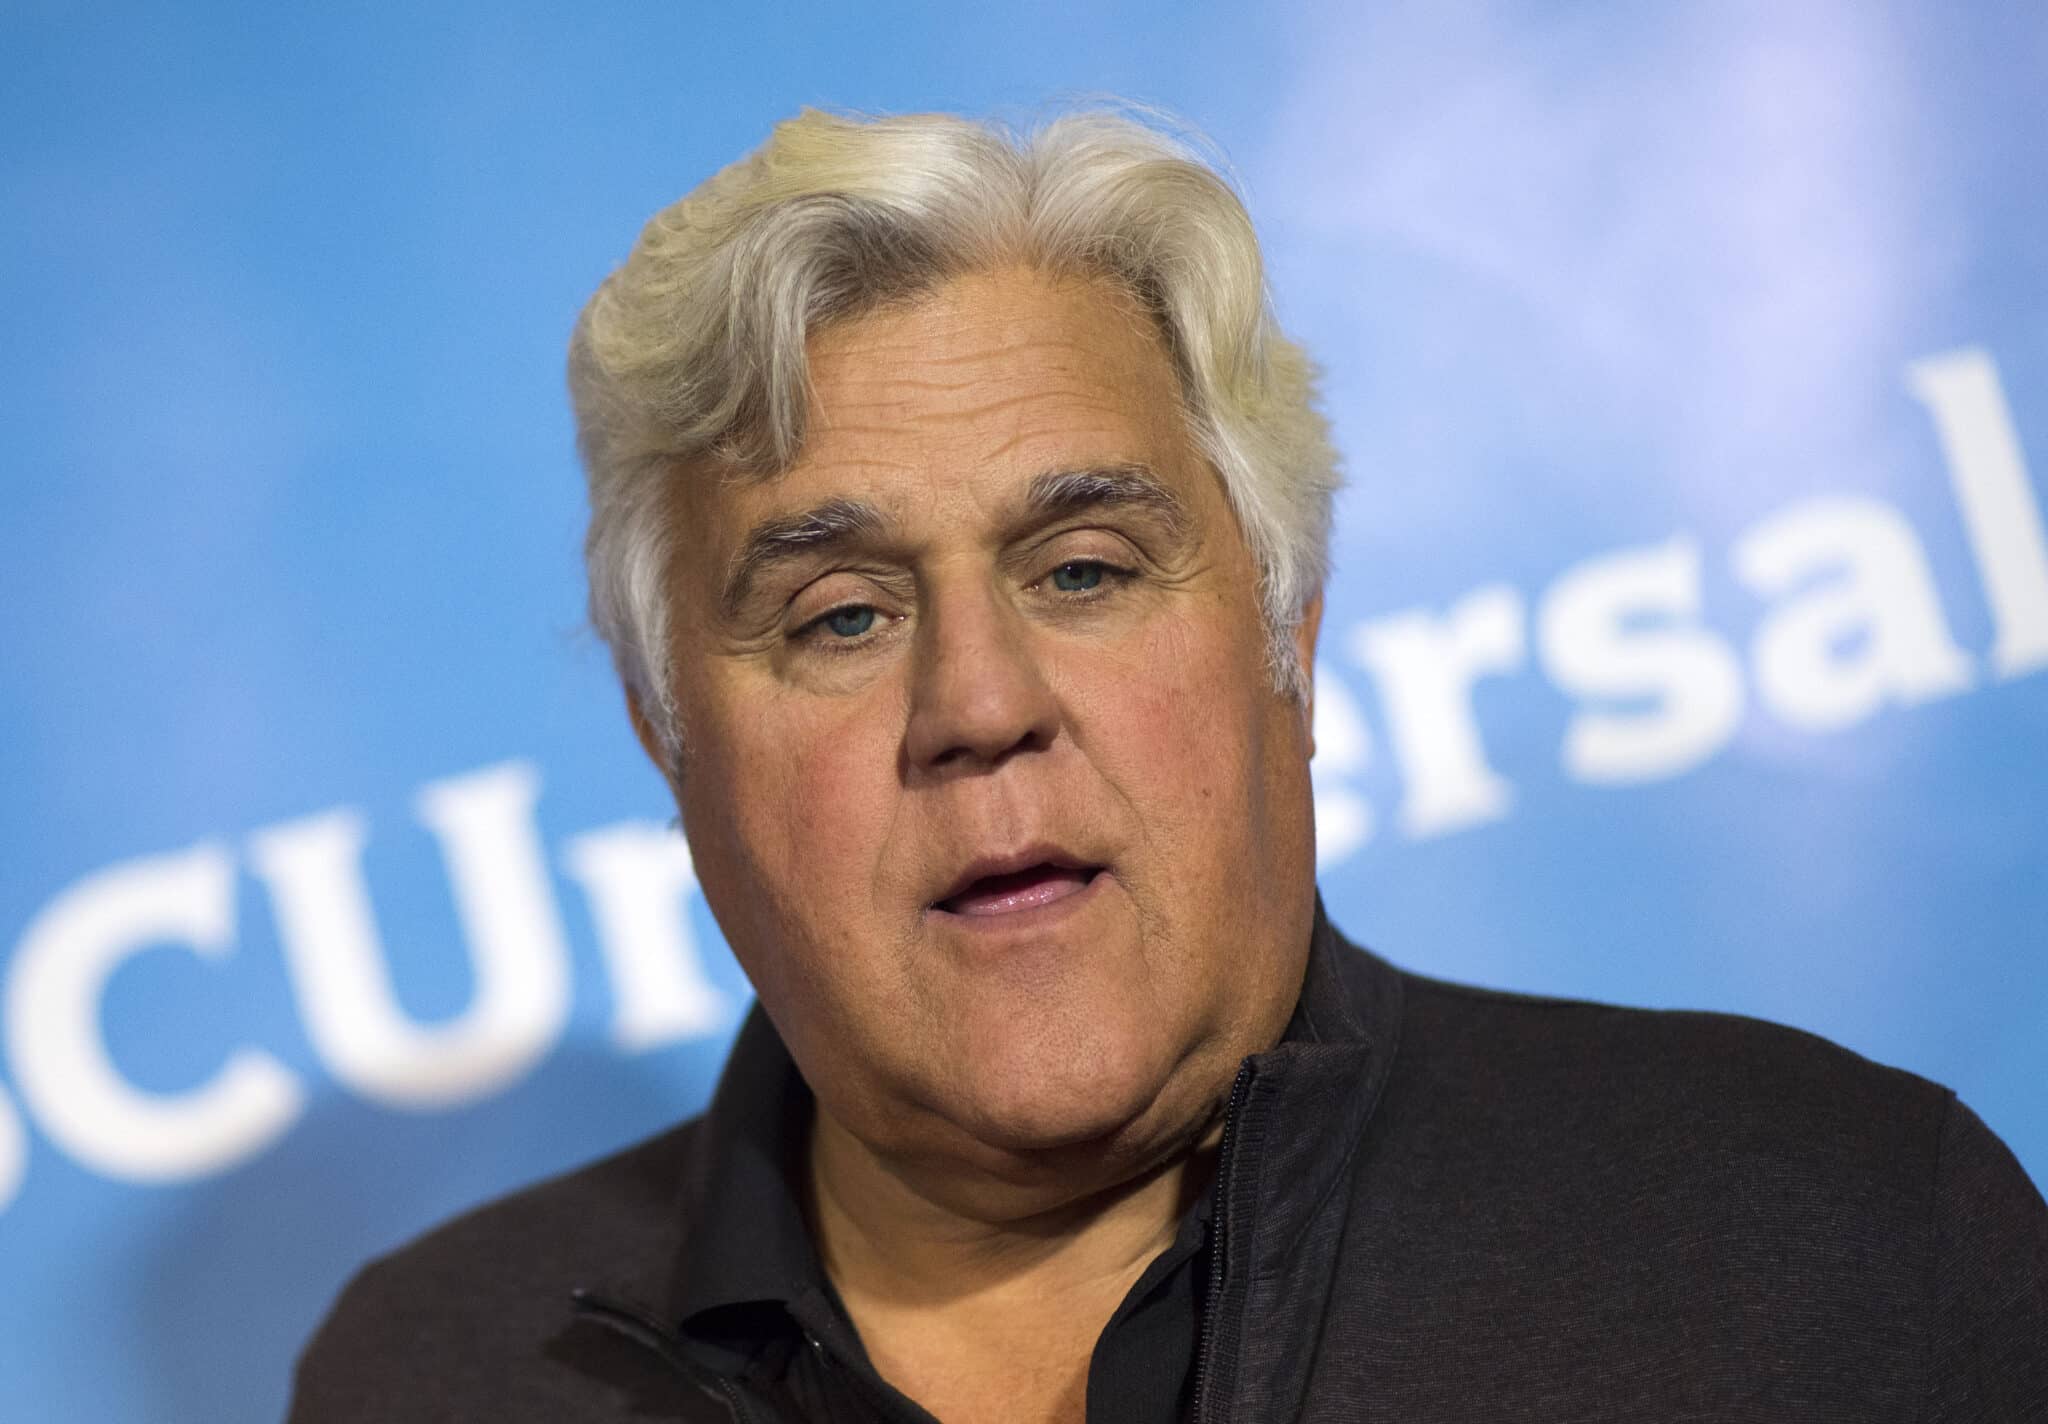 Comedian Jay Leno attends the NBC Universal TCA Winter Press Tour on January 9, 2018, in Pasadena, California. / AFP PHOTO / VALERIE MACON        (Photo credit should read VALERIE MACON/AFP via Getty Images)